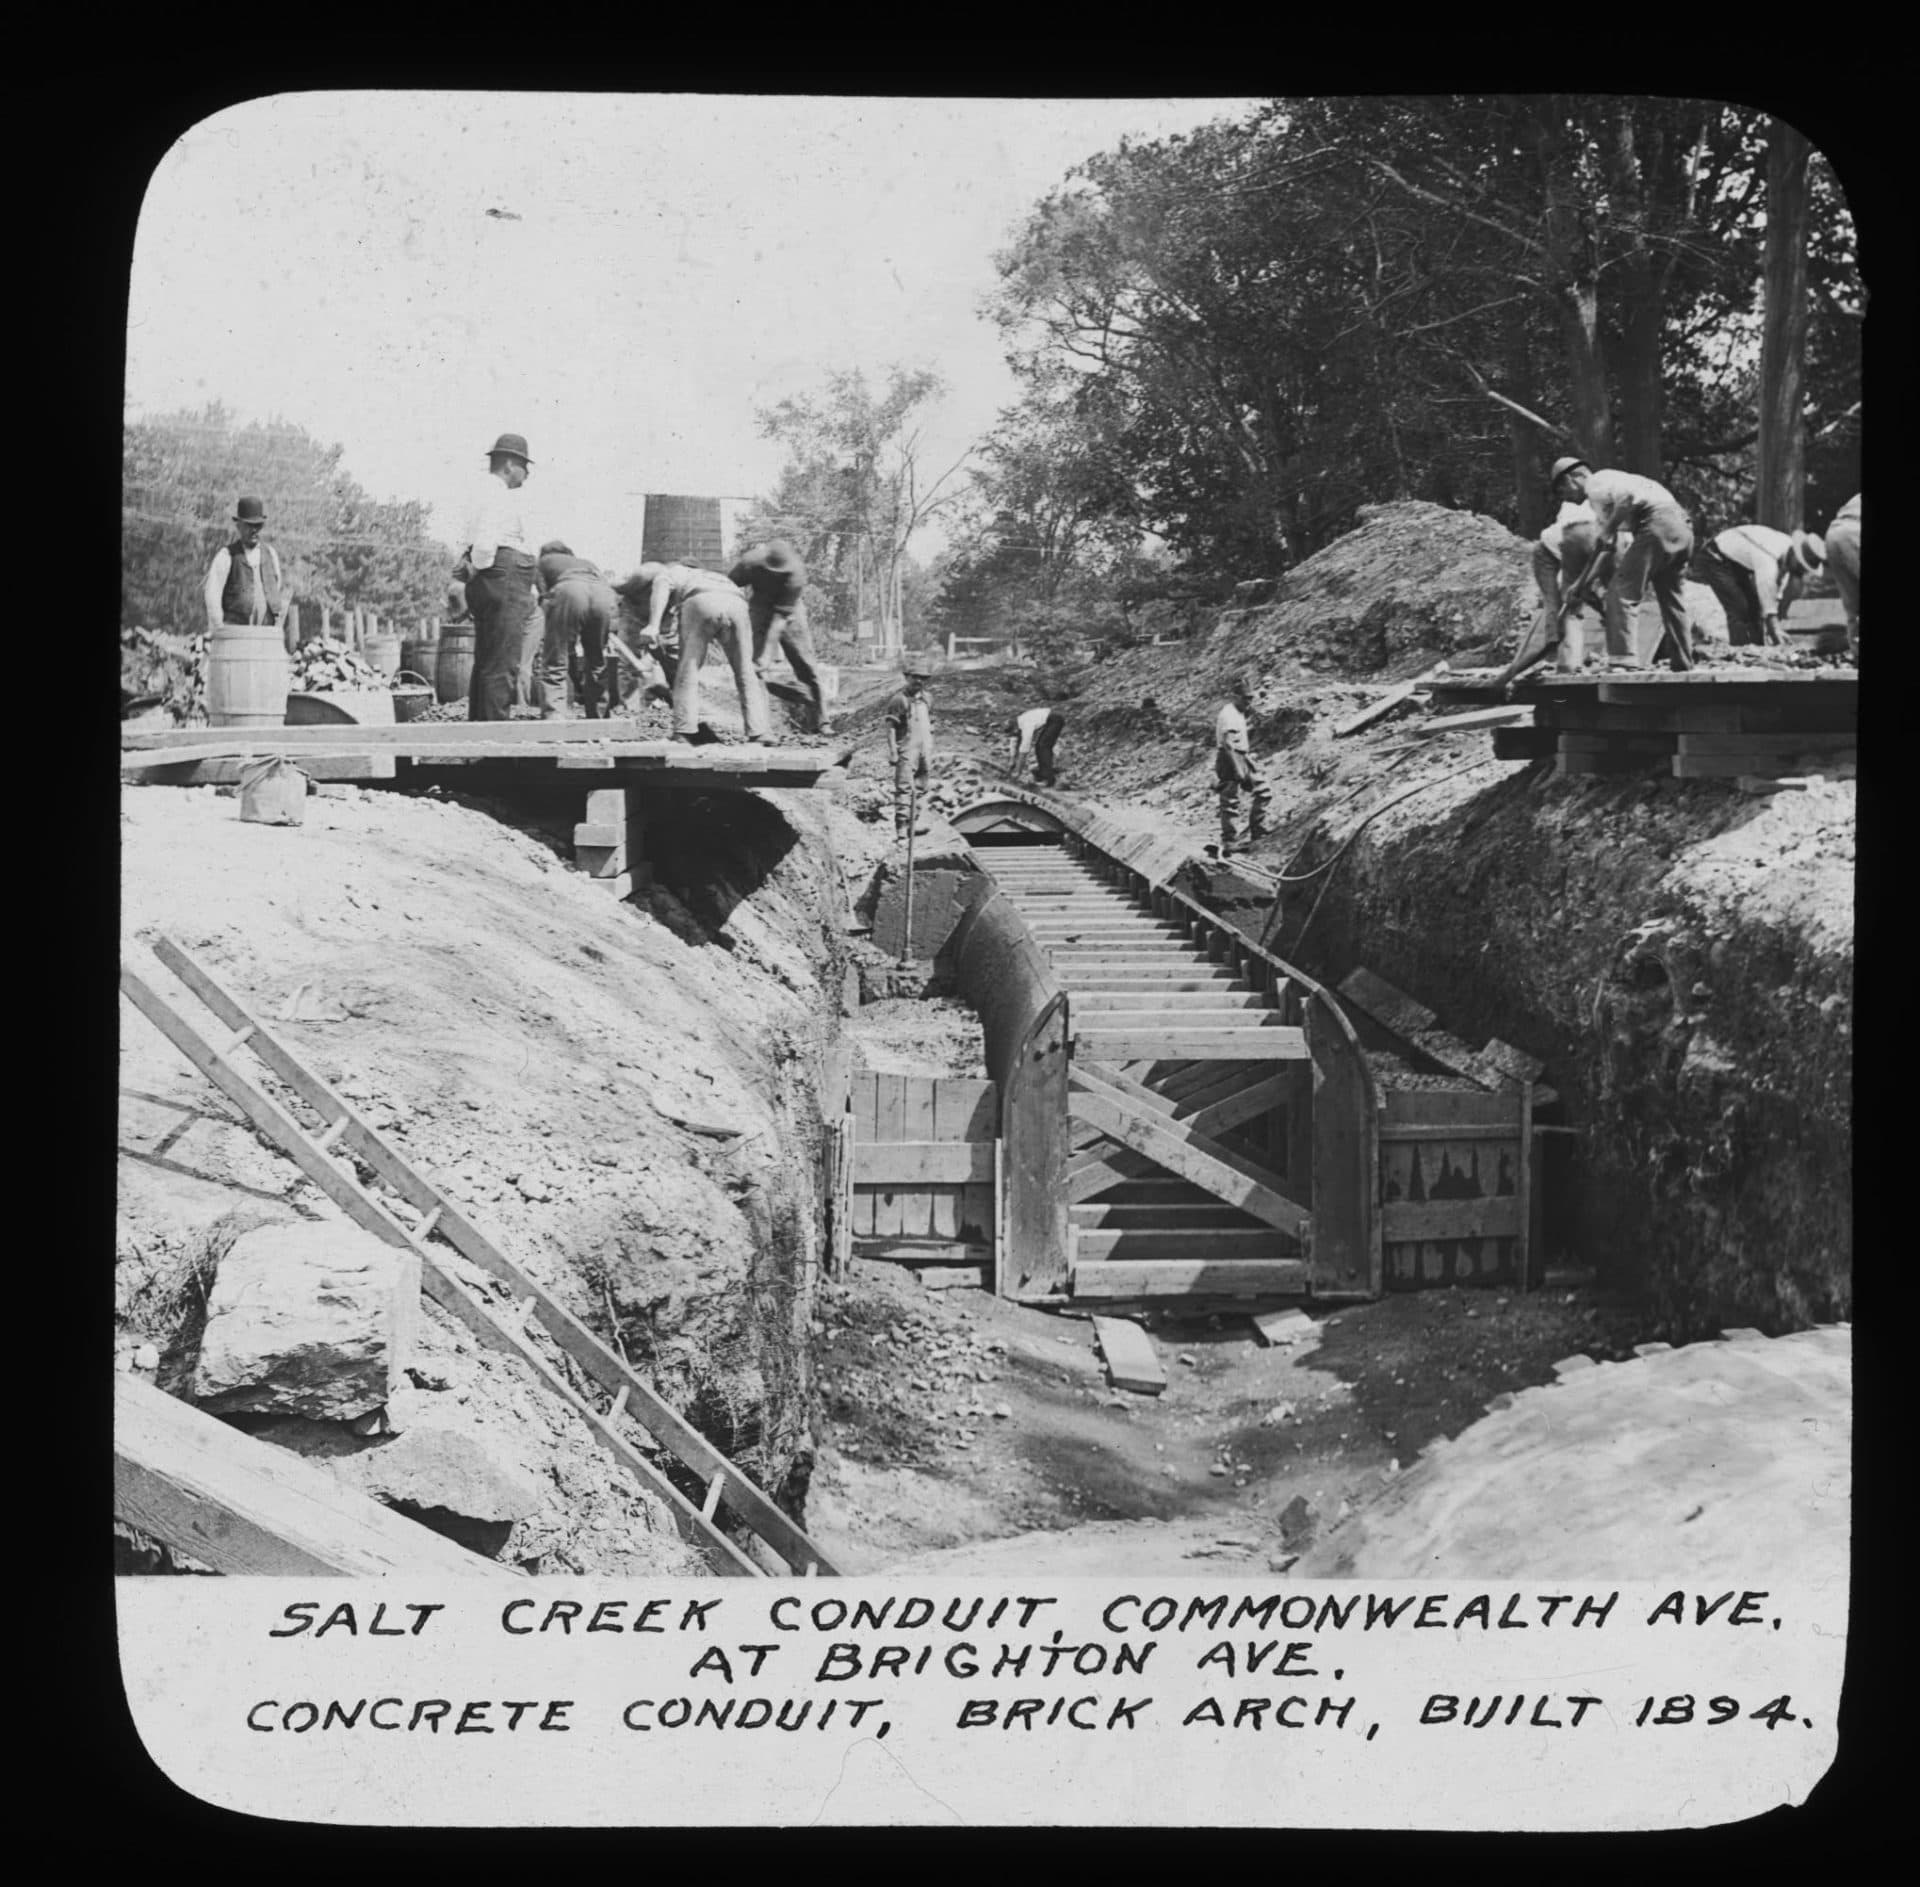 A crew works to install a sewer line along Commonwealth Avenue in the 1880s. (Courtesy Boston Water and Sewer Commission)